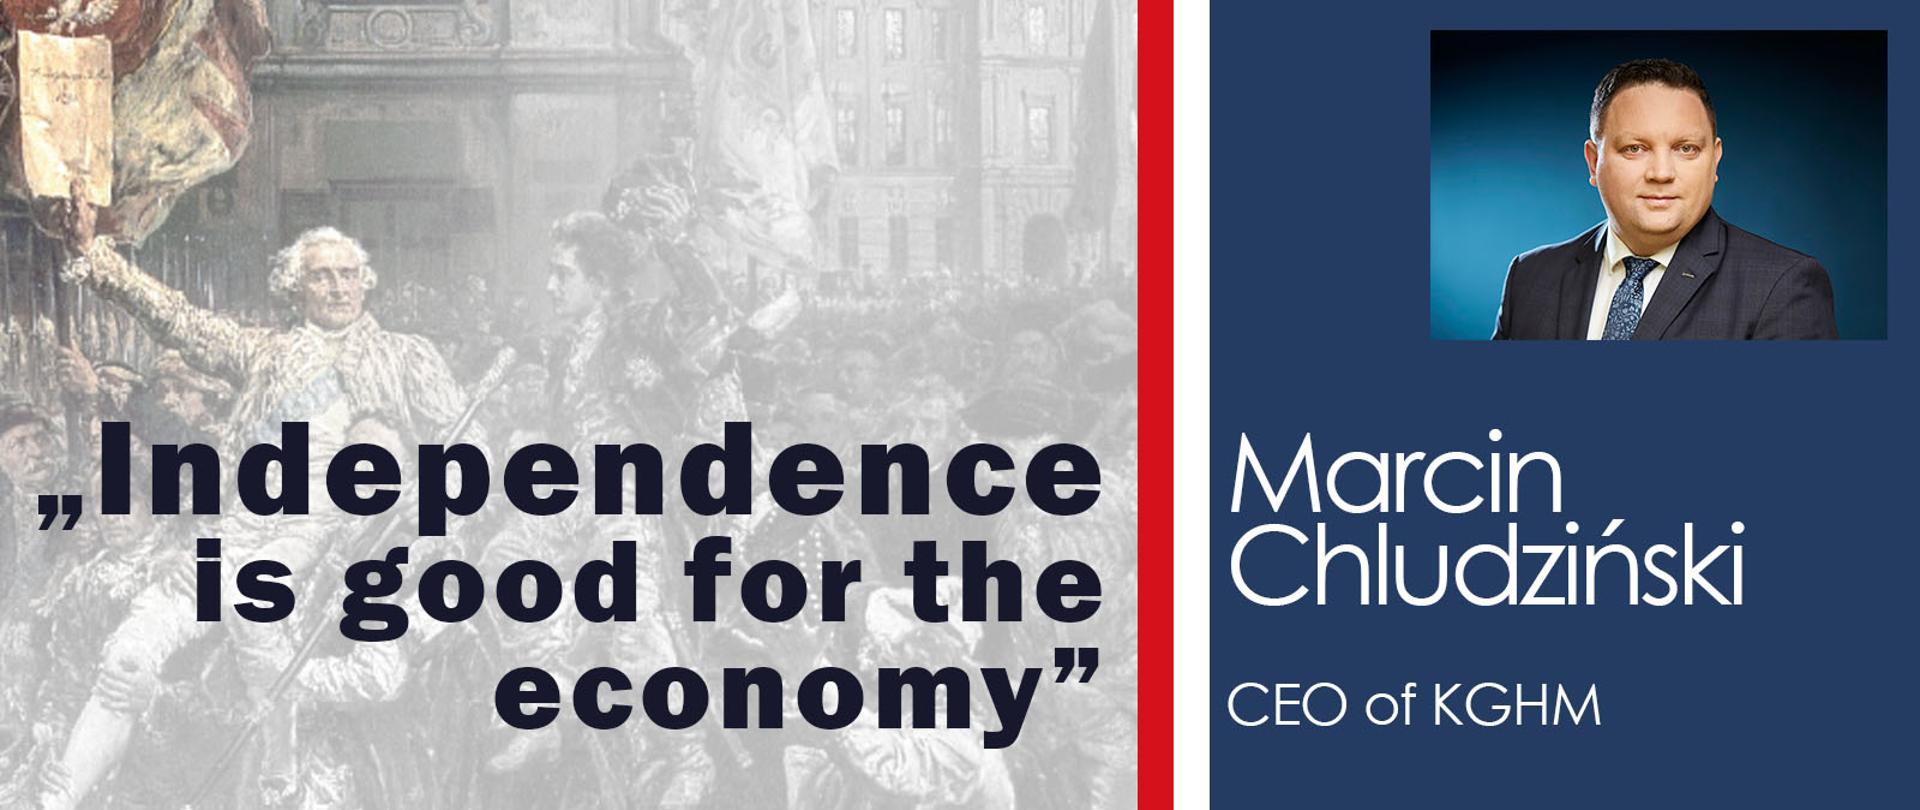 Independence is good for the economy